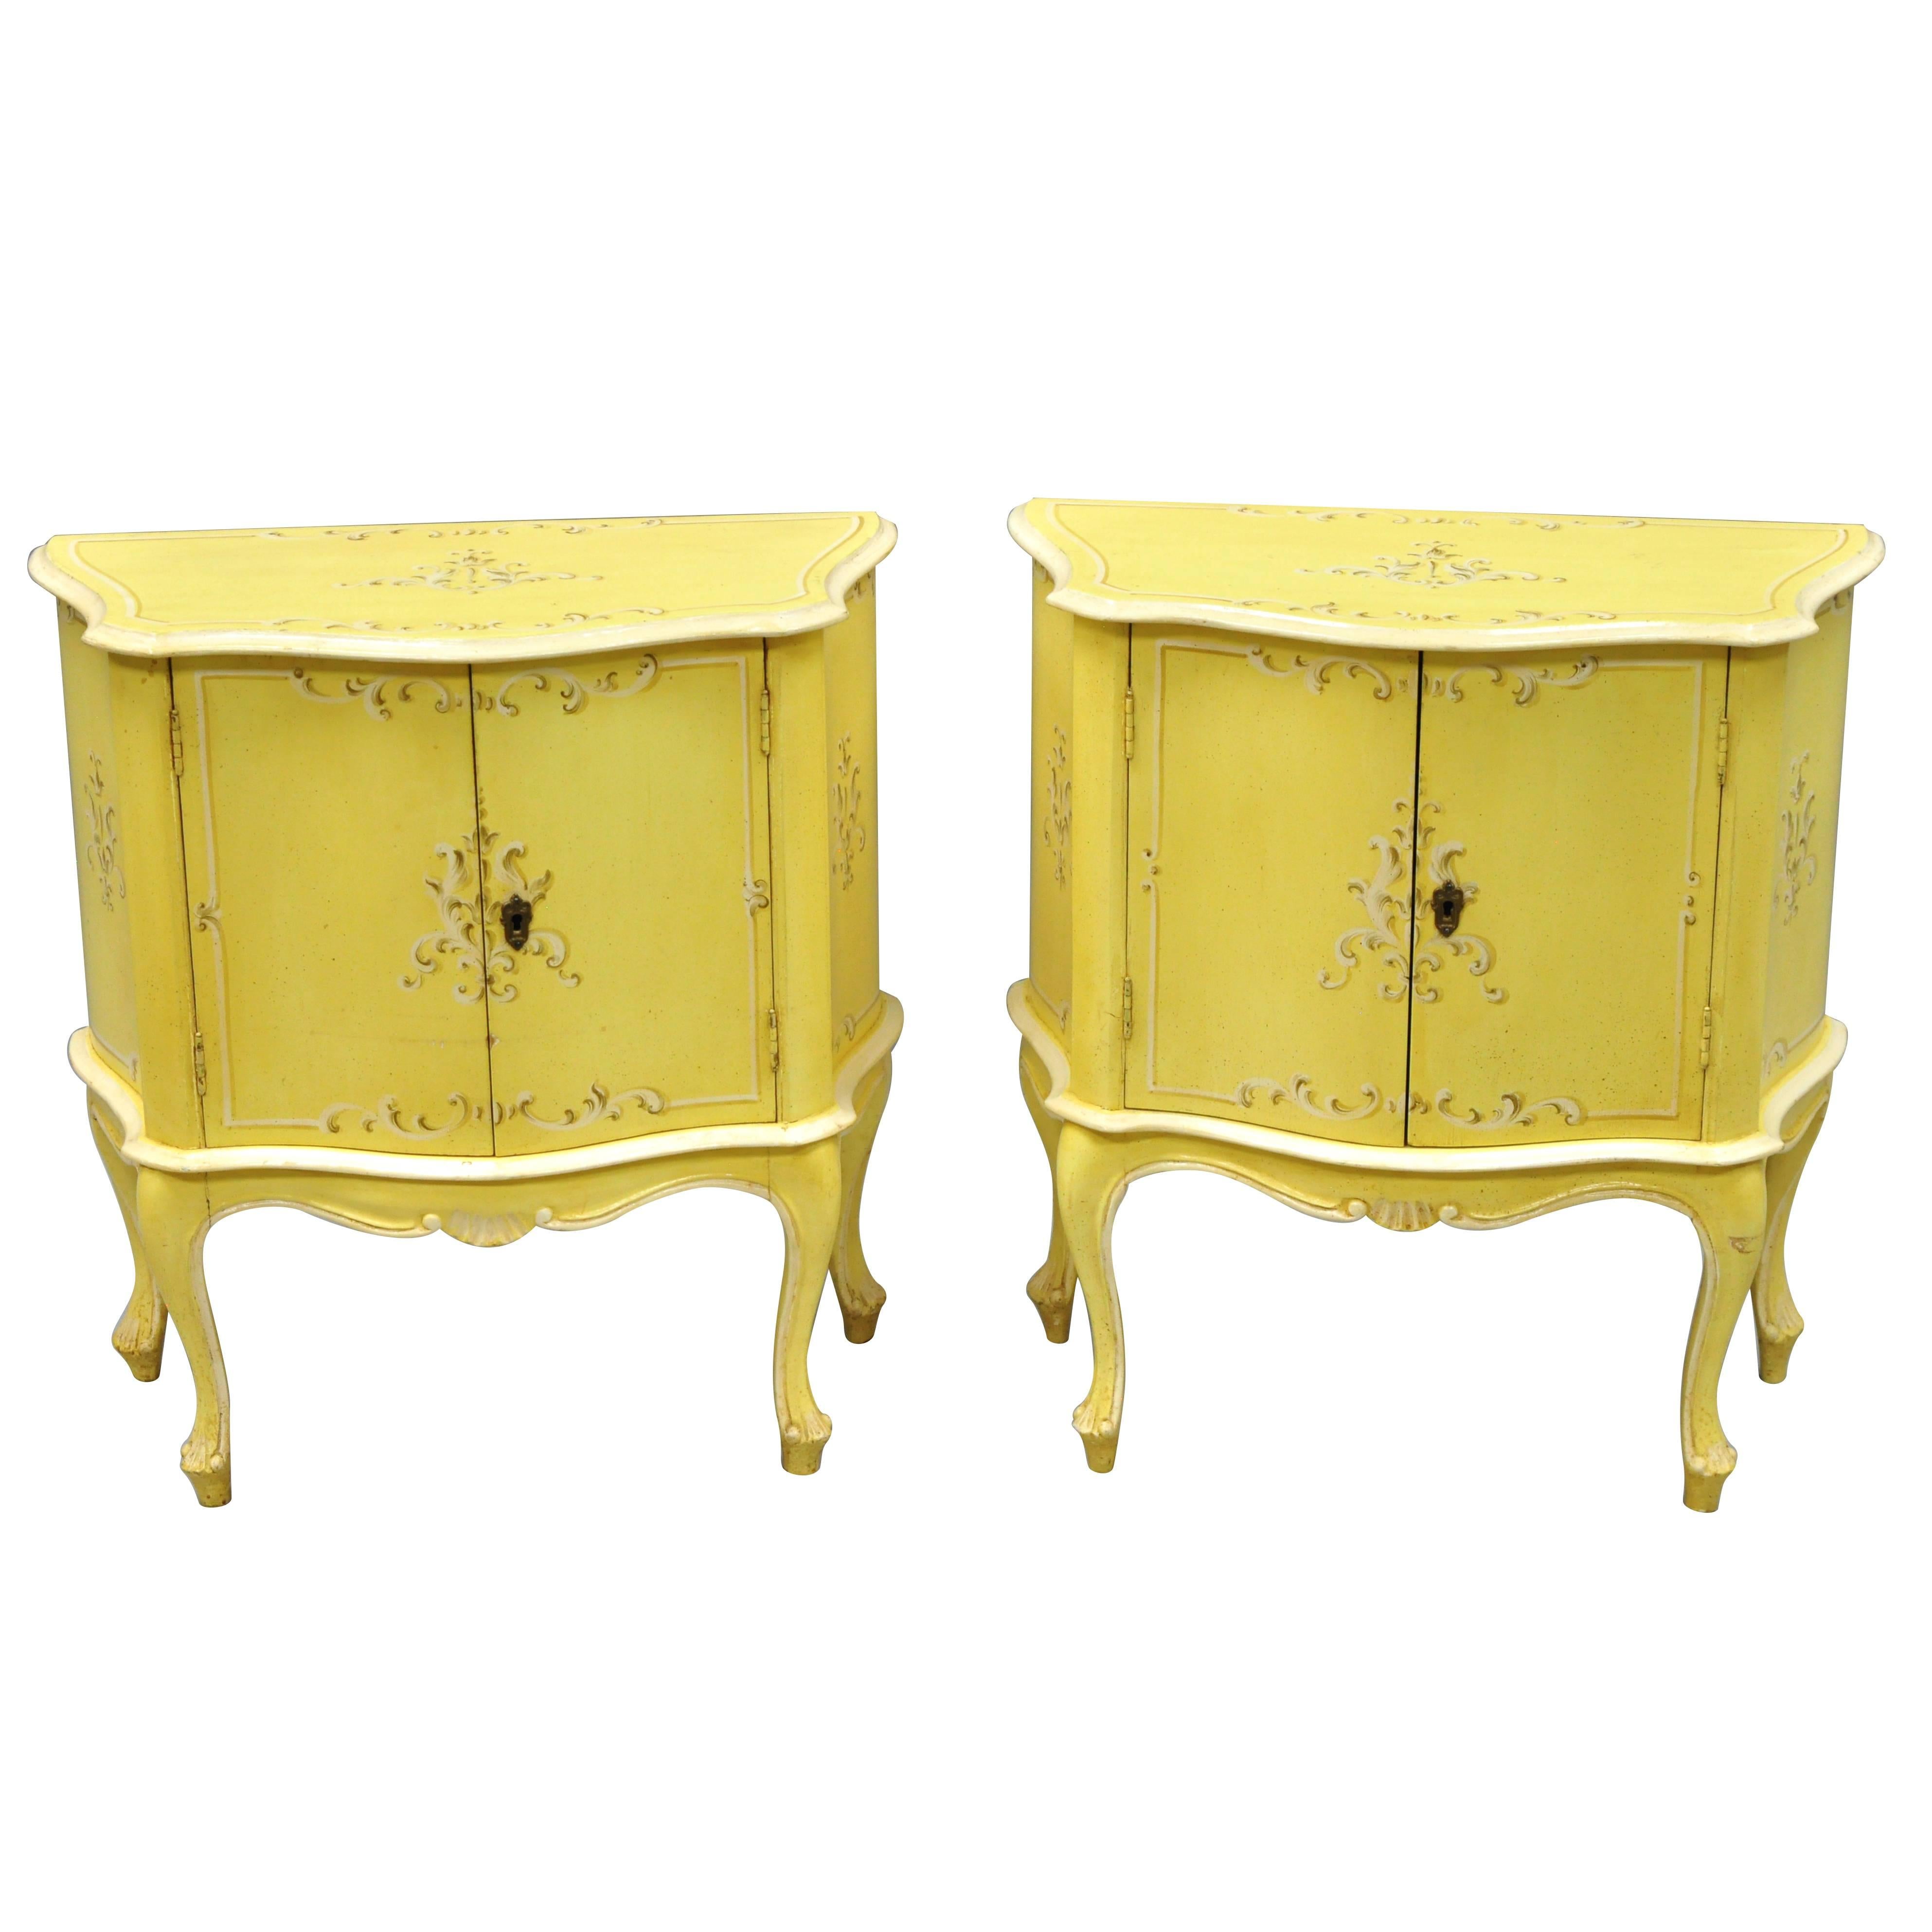 Pair of Small Italian Florentine Yellow Floral Painted Bombe Commode Side Chest